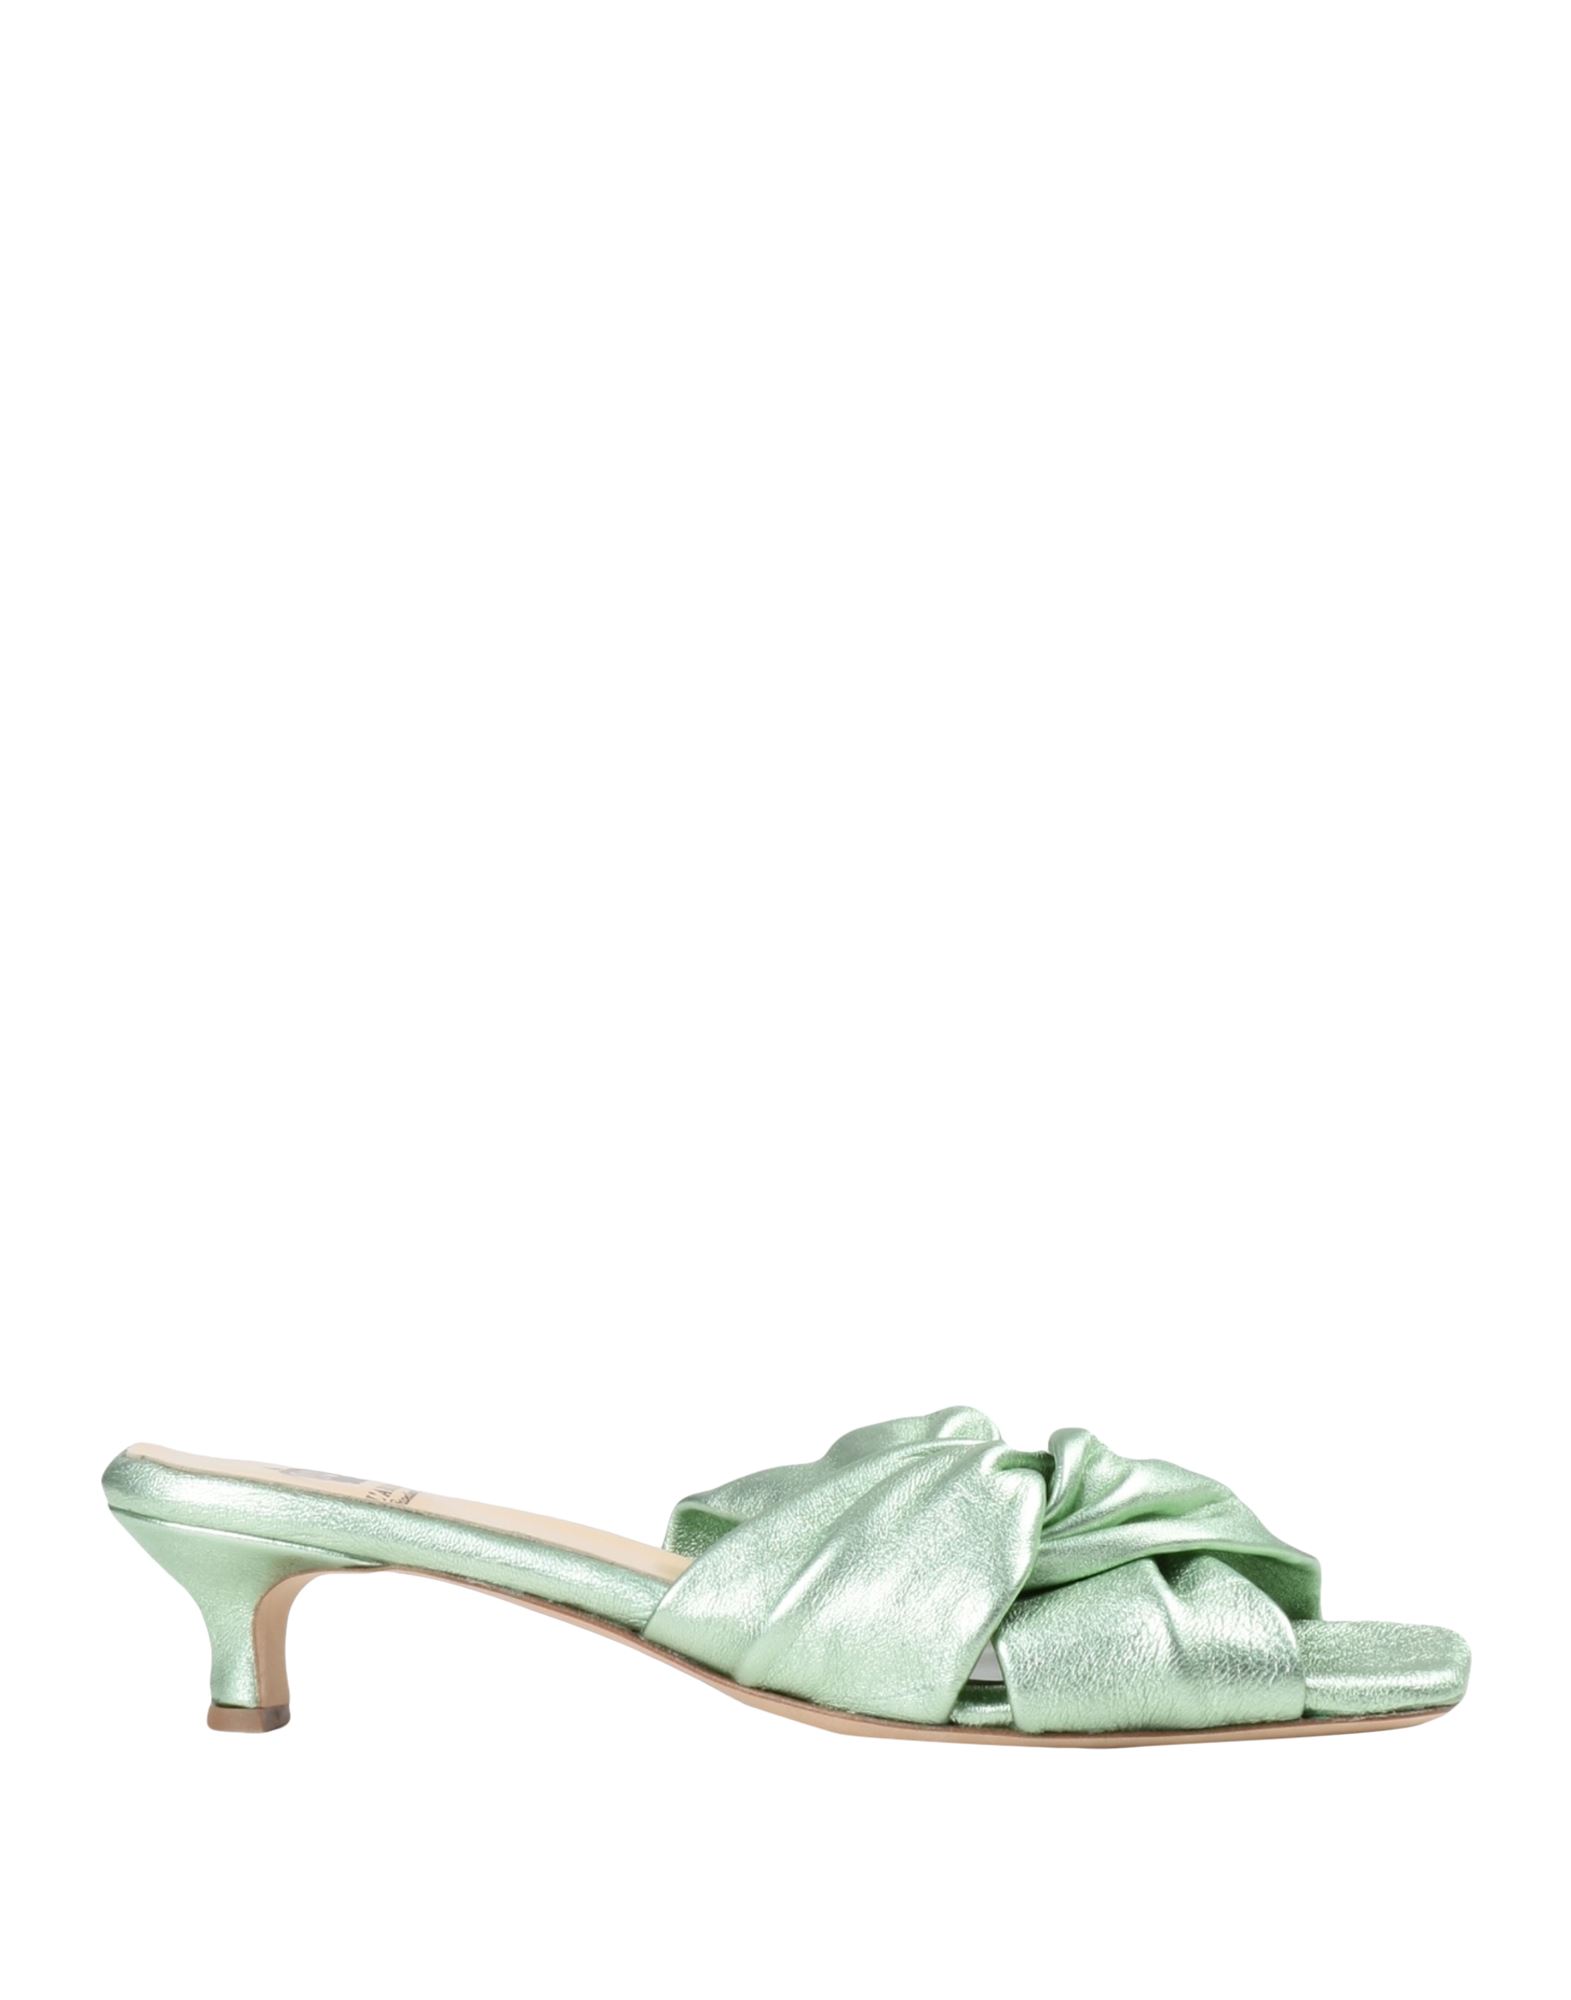 L'arianna Woman Sandals Light Green Size 7 Soft Leather